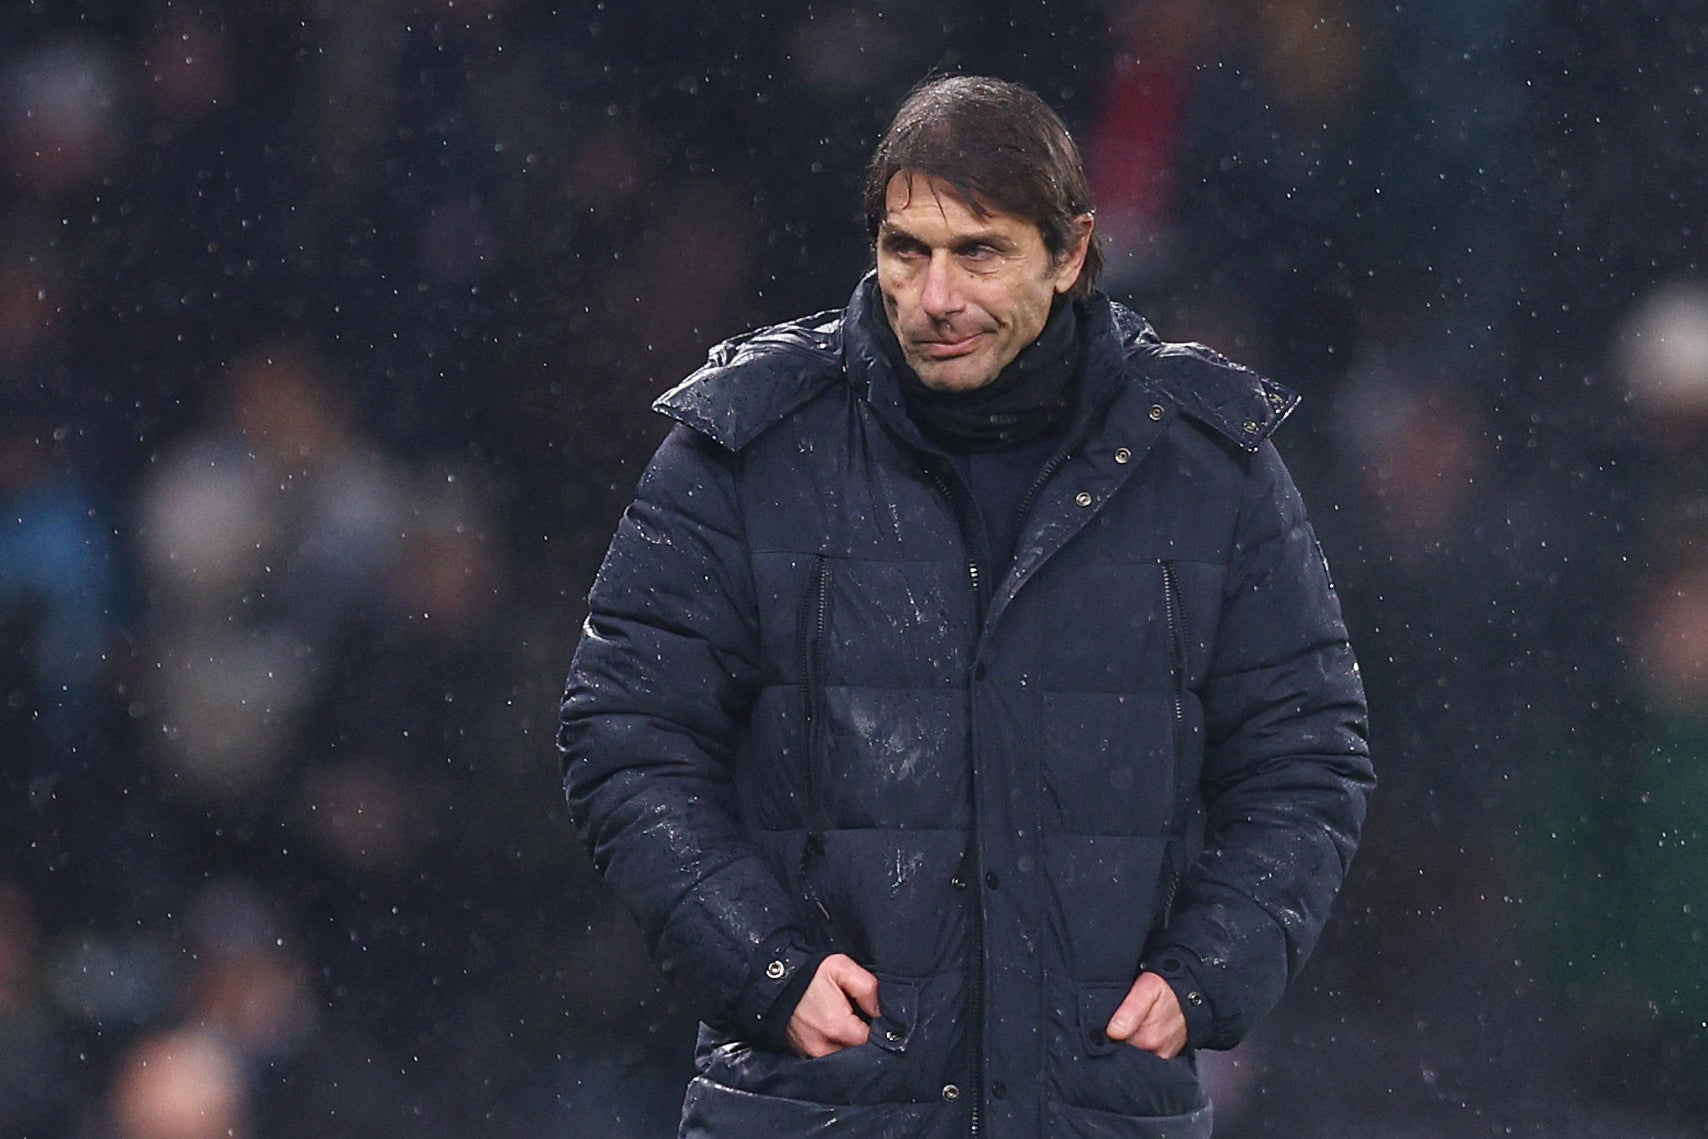 Antonio Conte’s time at Tottenham appears to be over